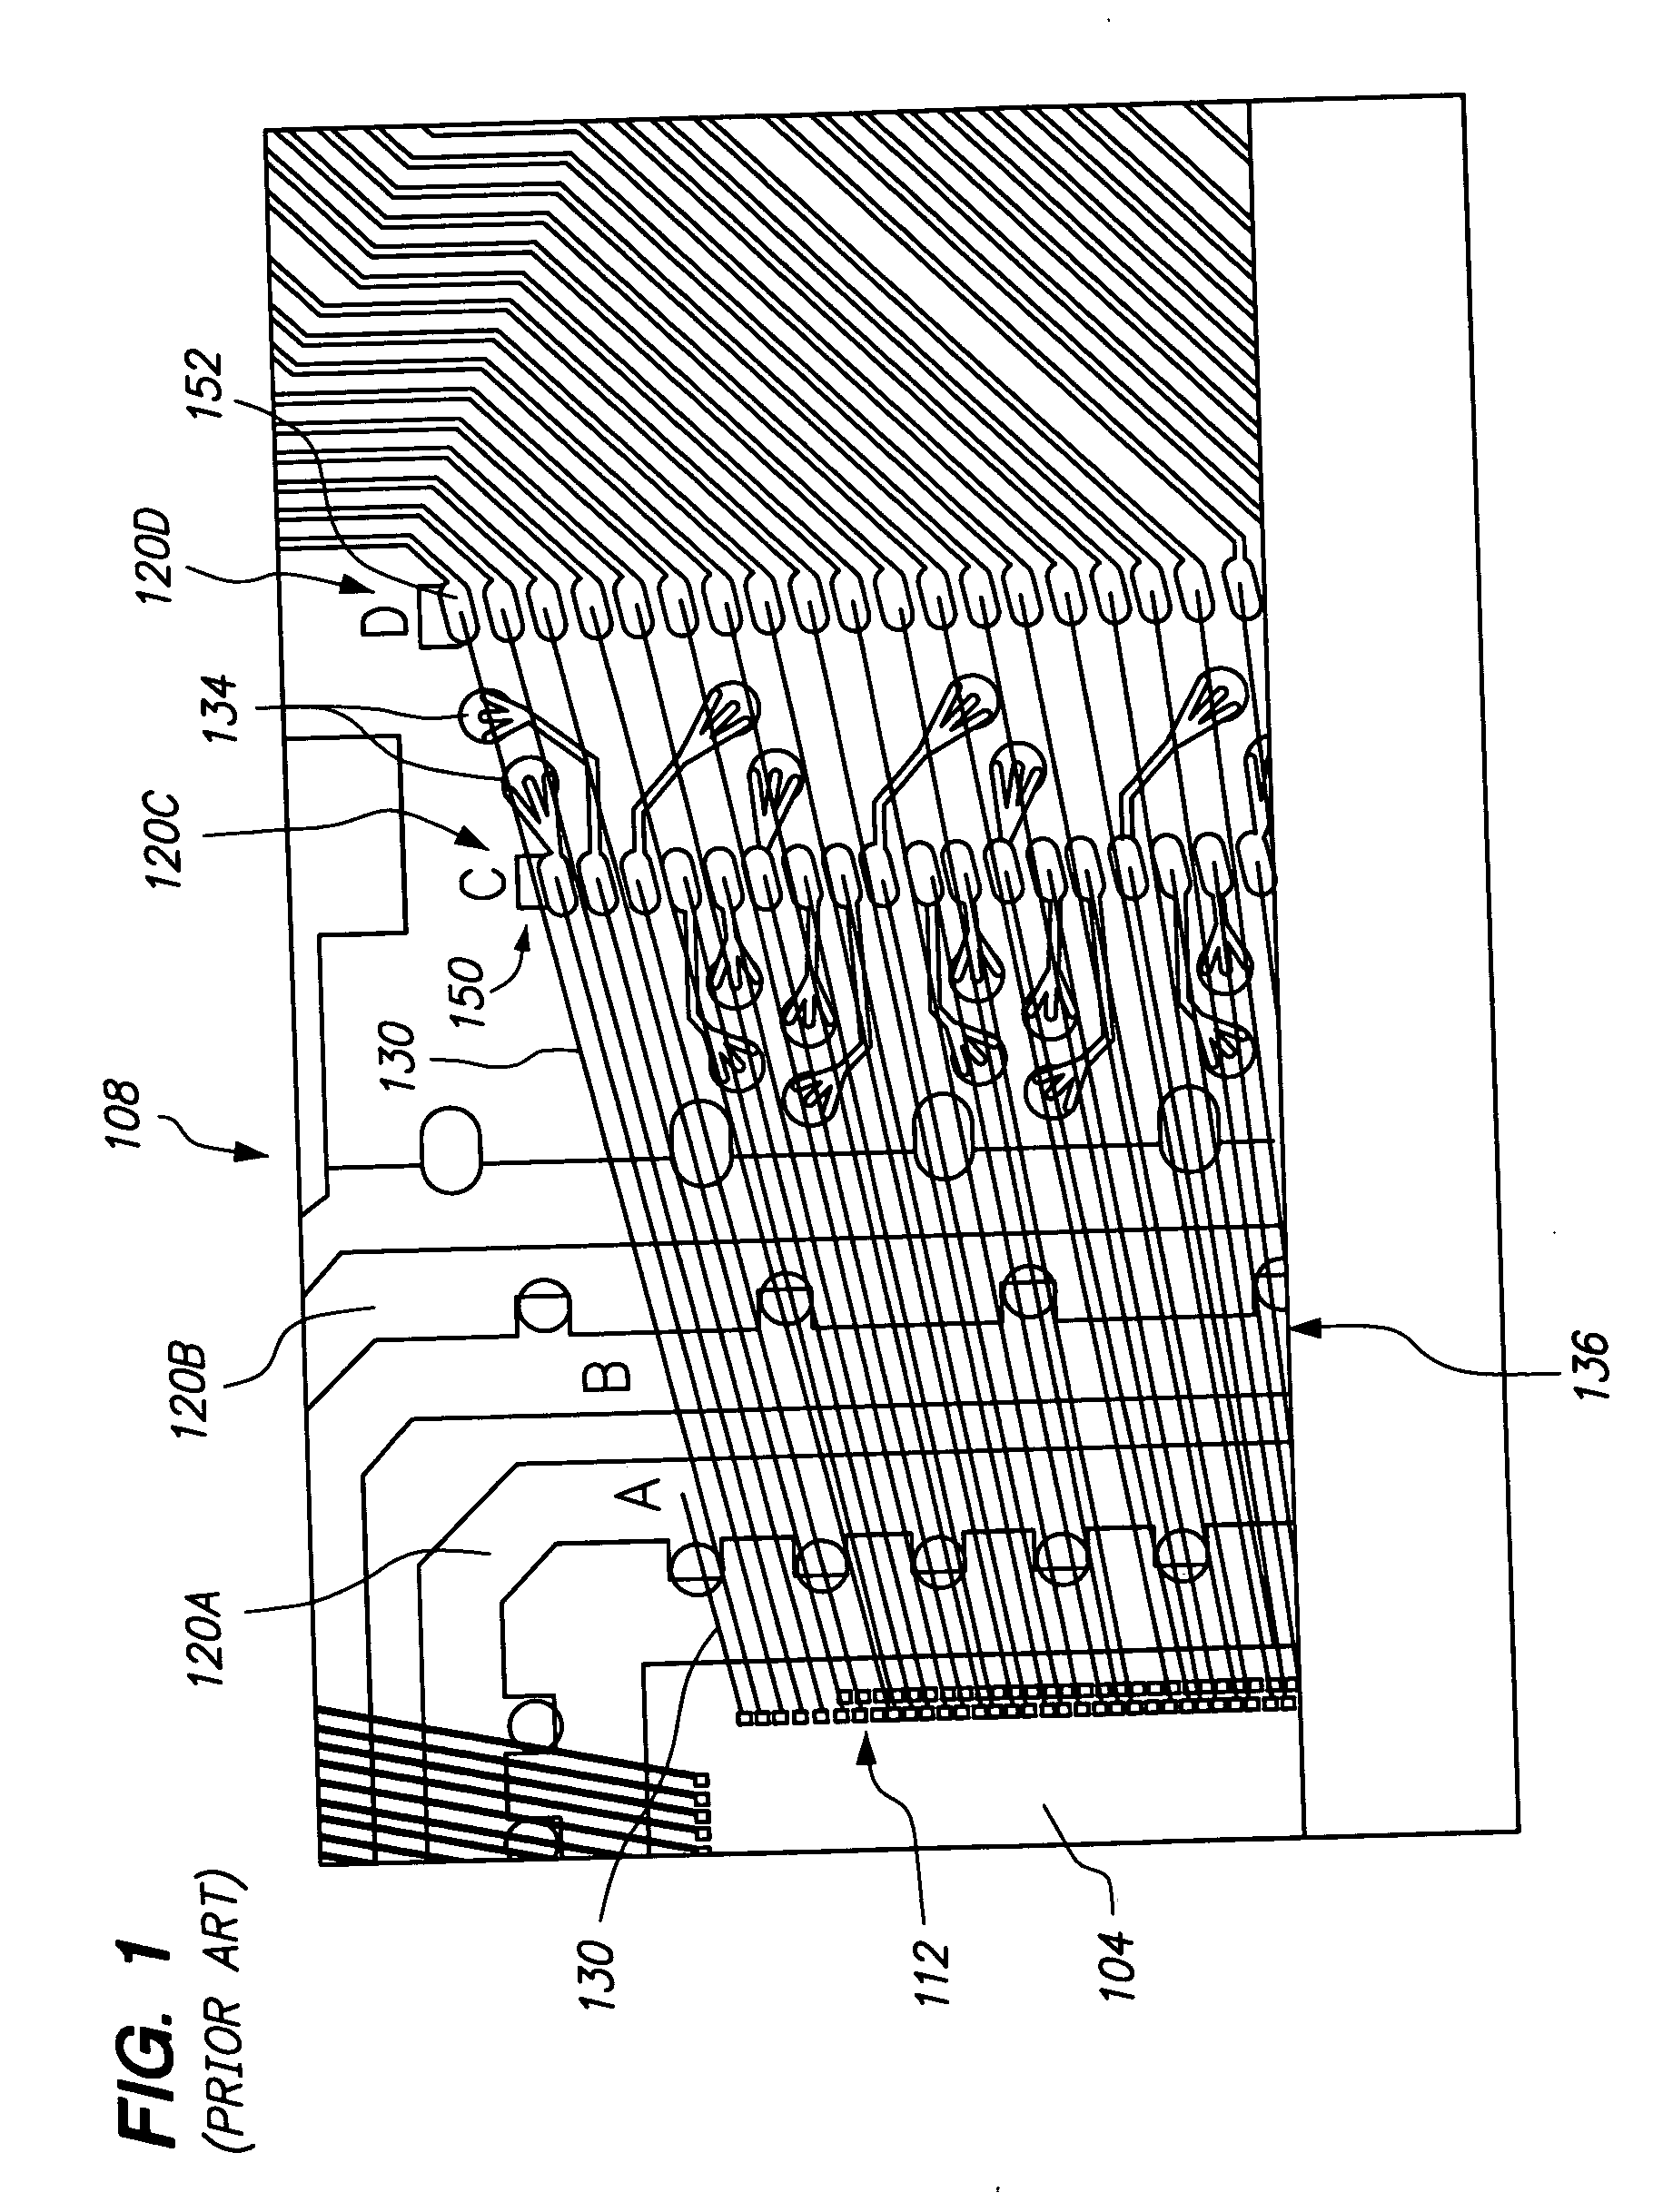 Package design and method for electrically connecting die to package